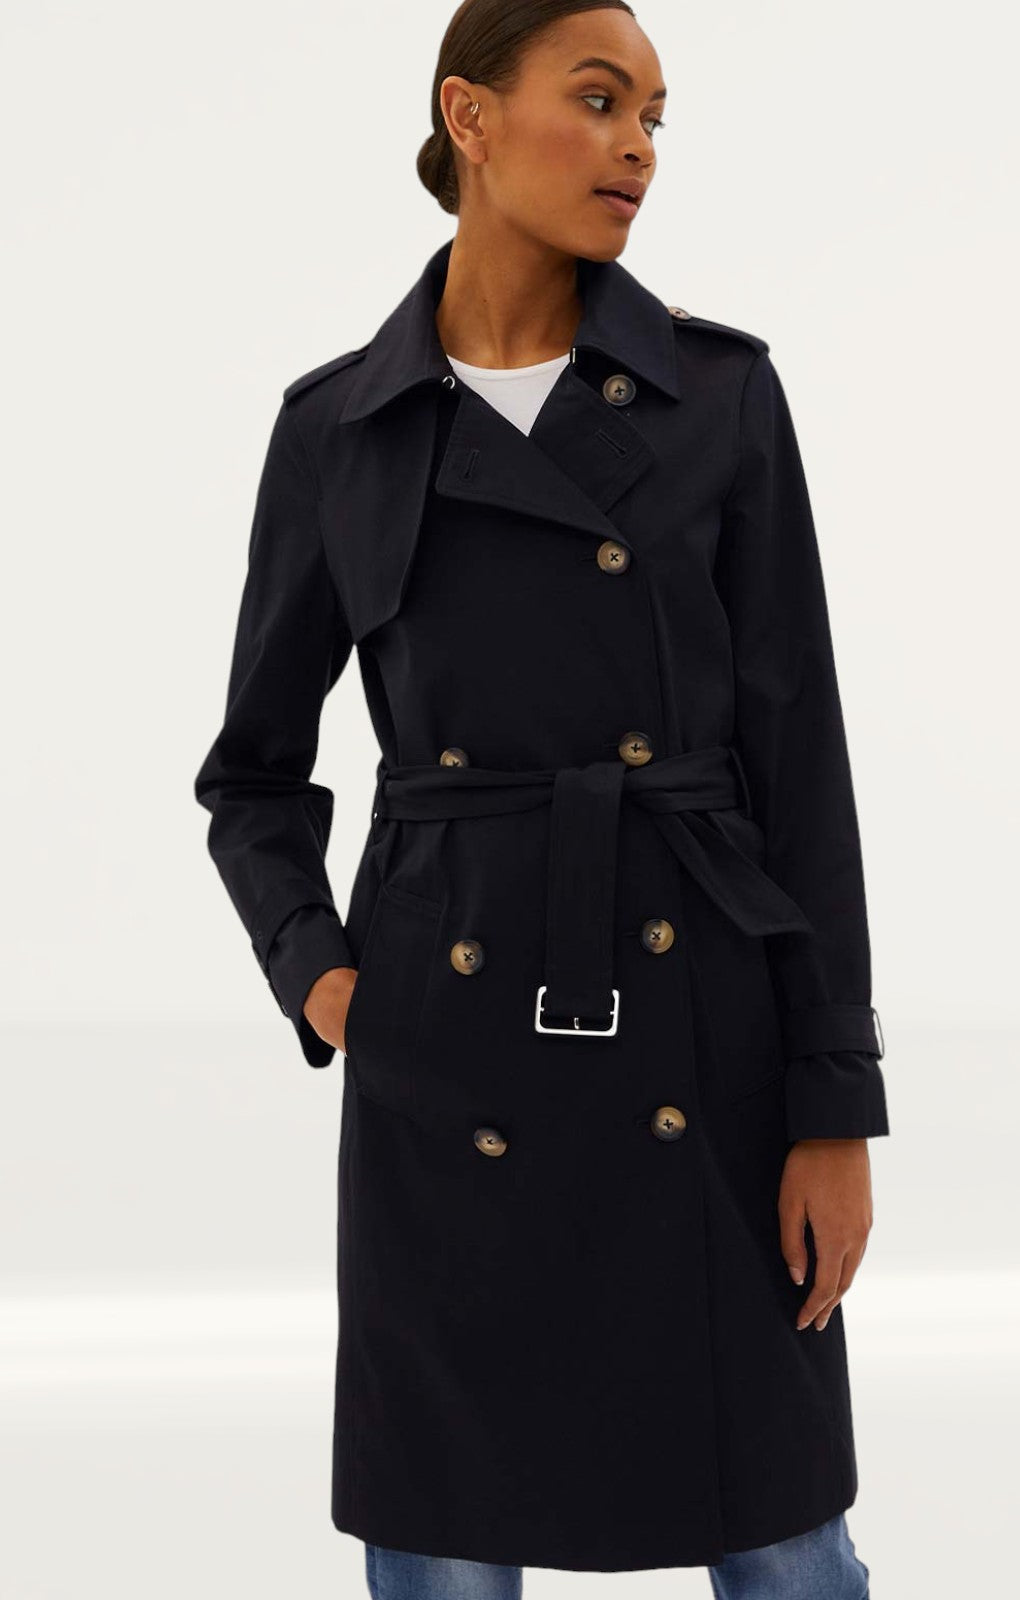 M&S Black Essential Trench product image